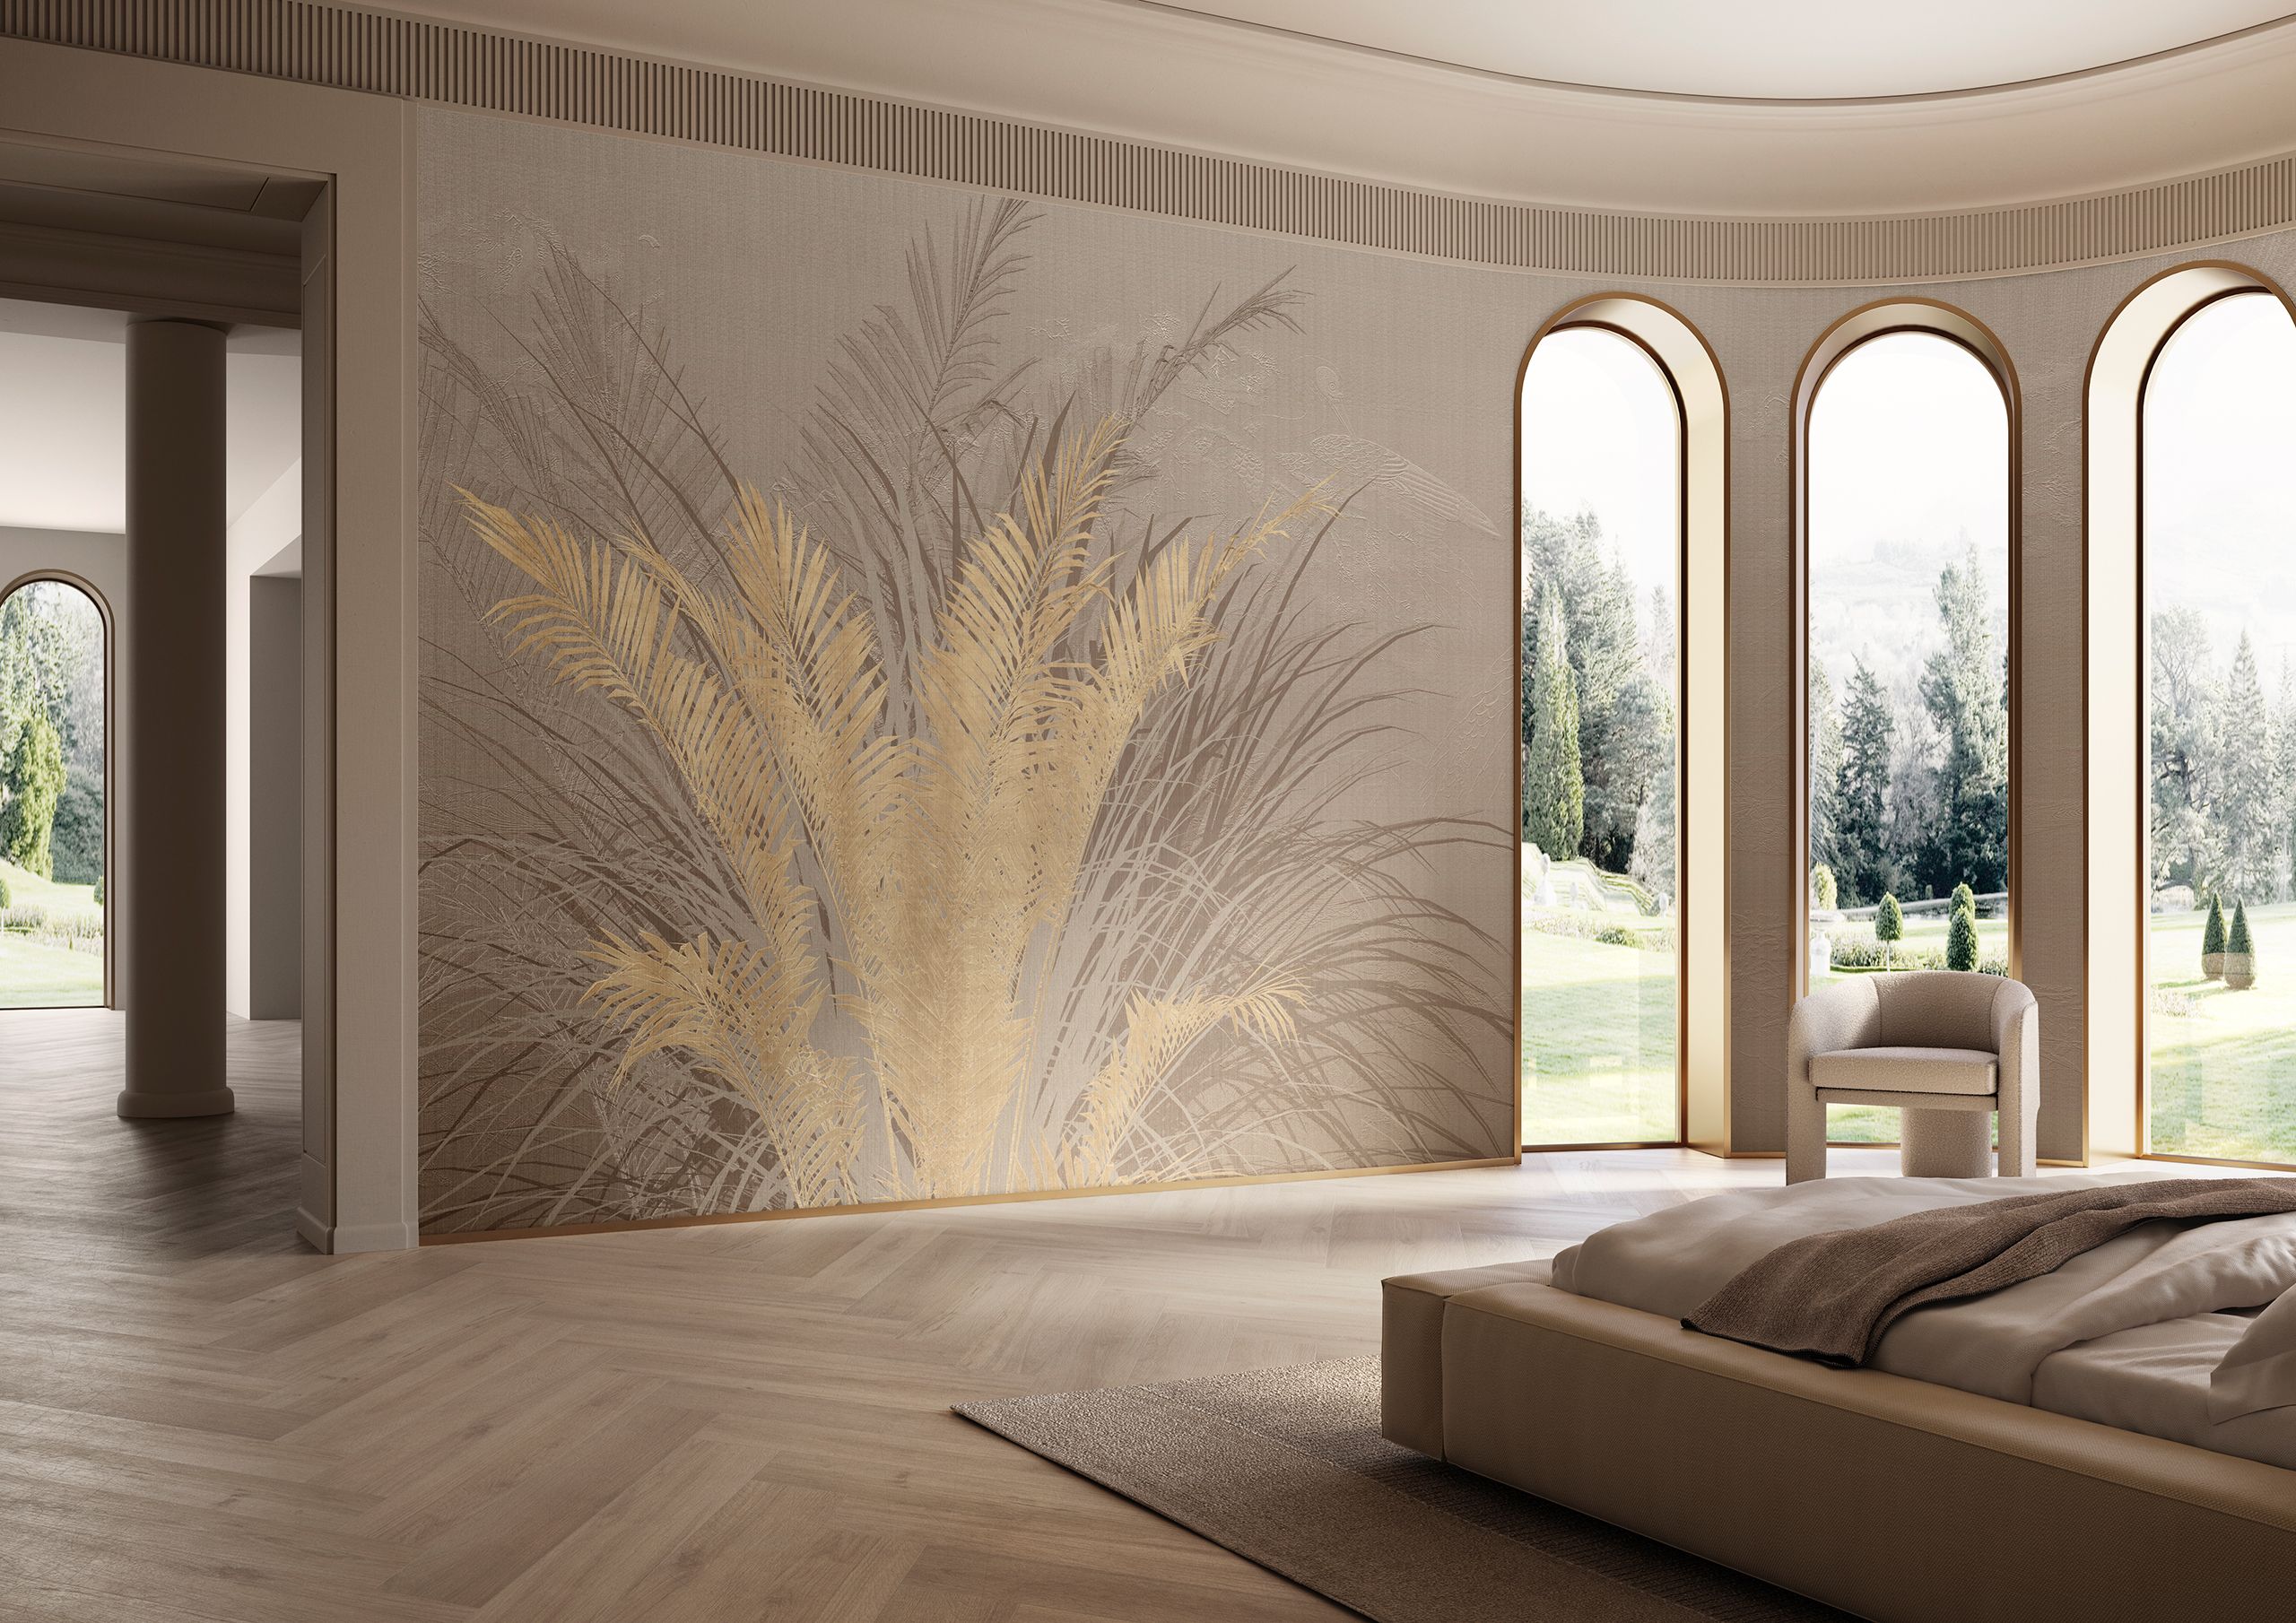 Italian Wall Coverings from Luxury Art Surfaces in a Luxury Living Room, styled by Spacio Interior Styling team